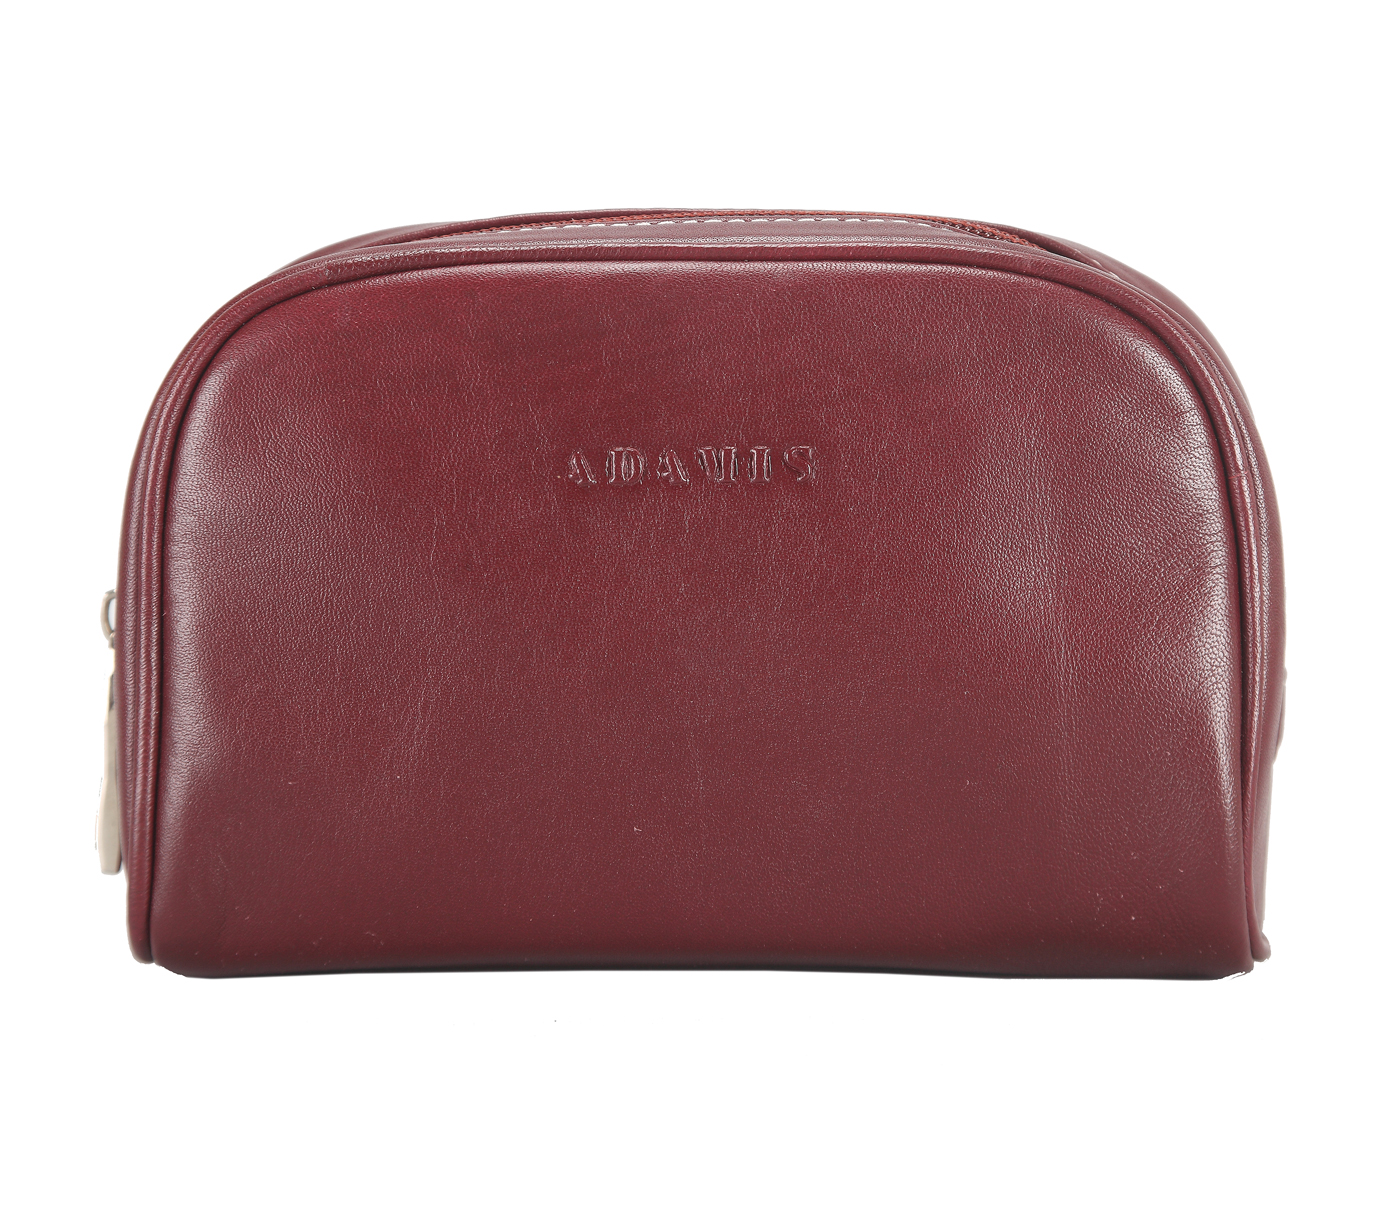 Travel Essential--Unisex Wash & Toiletry travel Bag in Genuine Leather - Wine